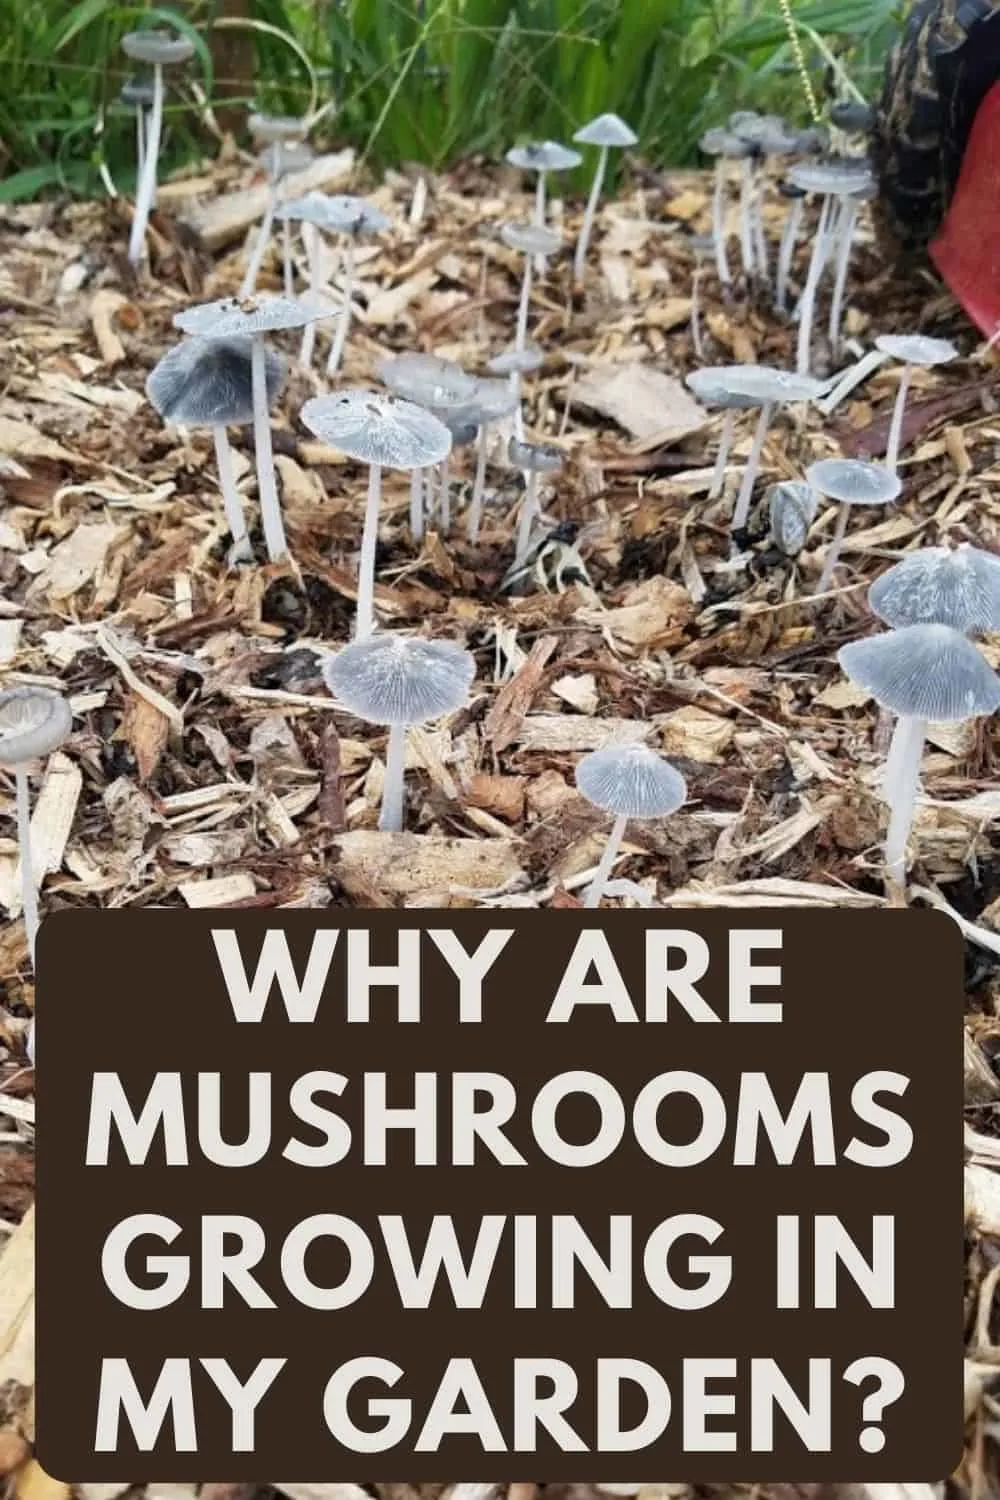 Why Are Mushrooms Growing in My Garden?